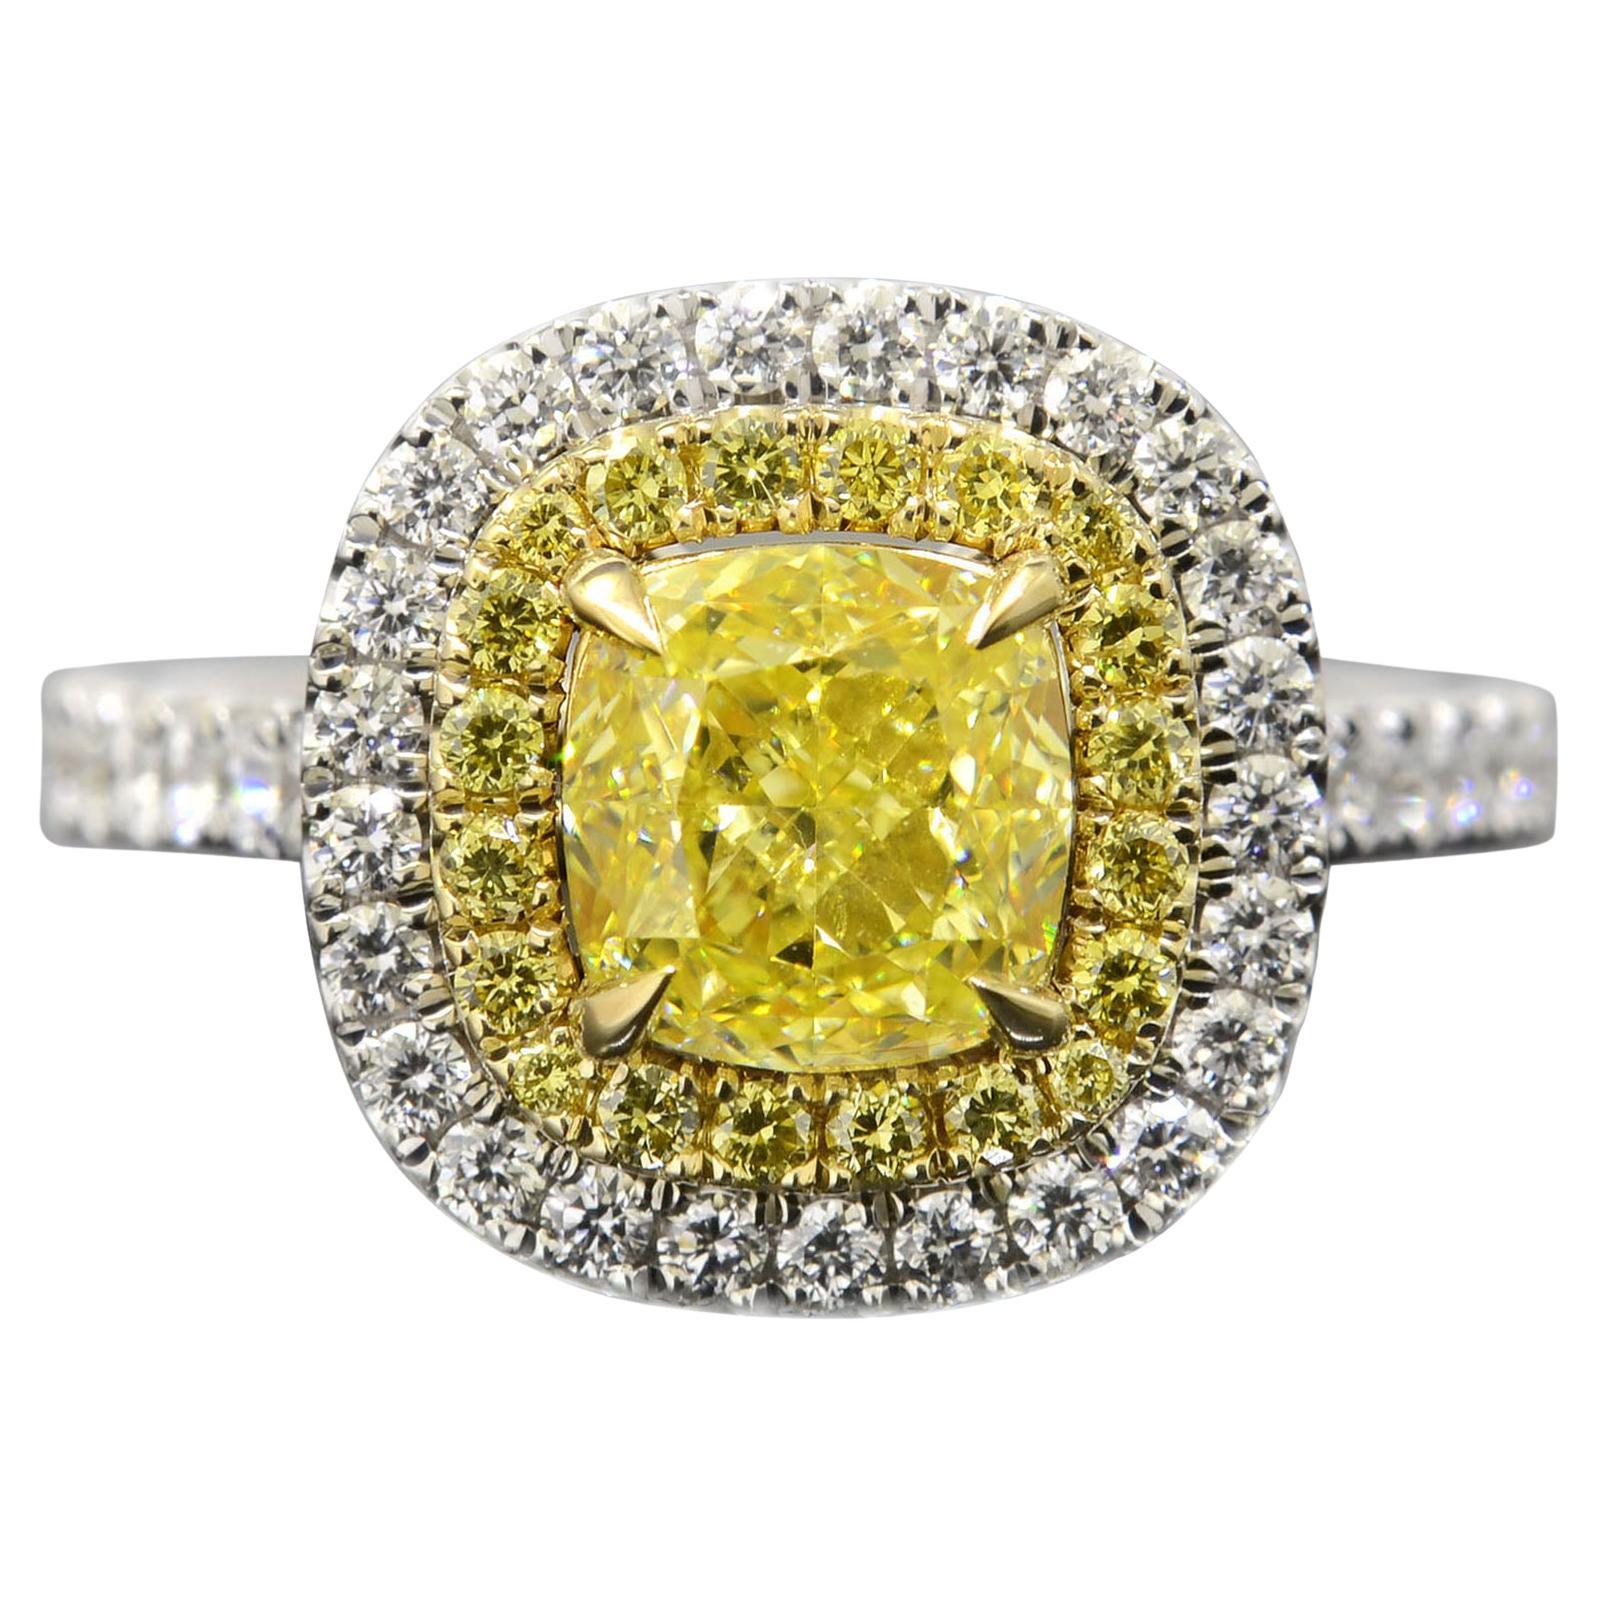 2.50 Ct Fancy Yellow Dual Halo Cushion Engagement Ring VS2 Clarity GIA Certified